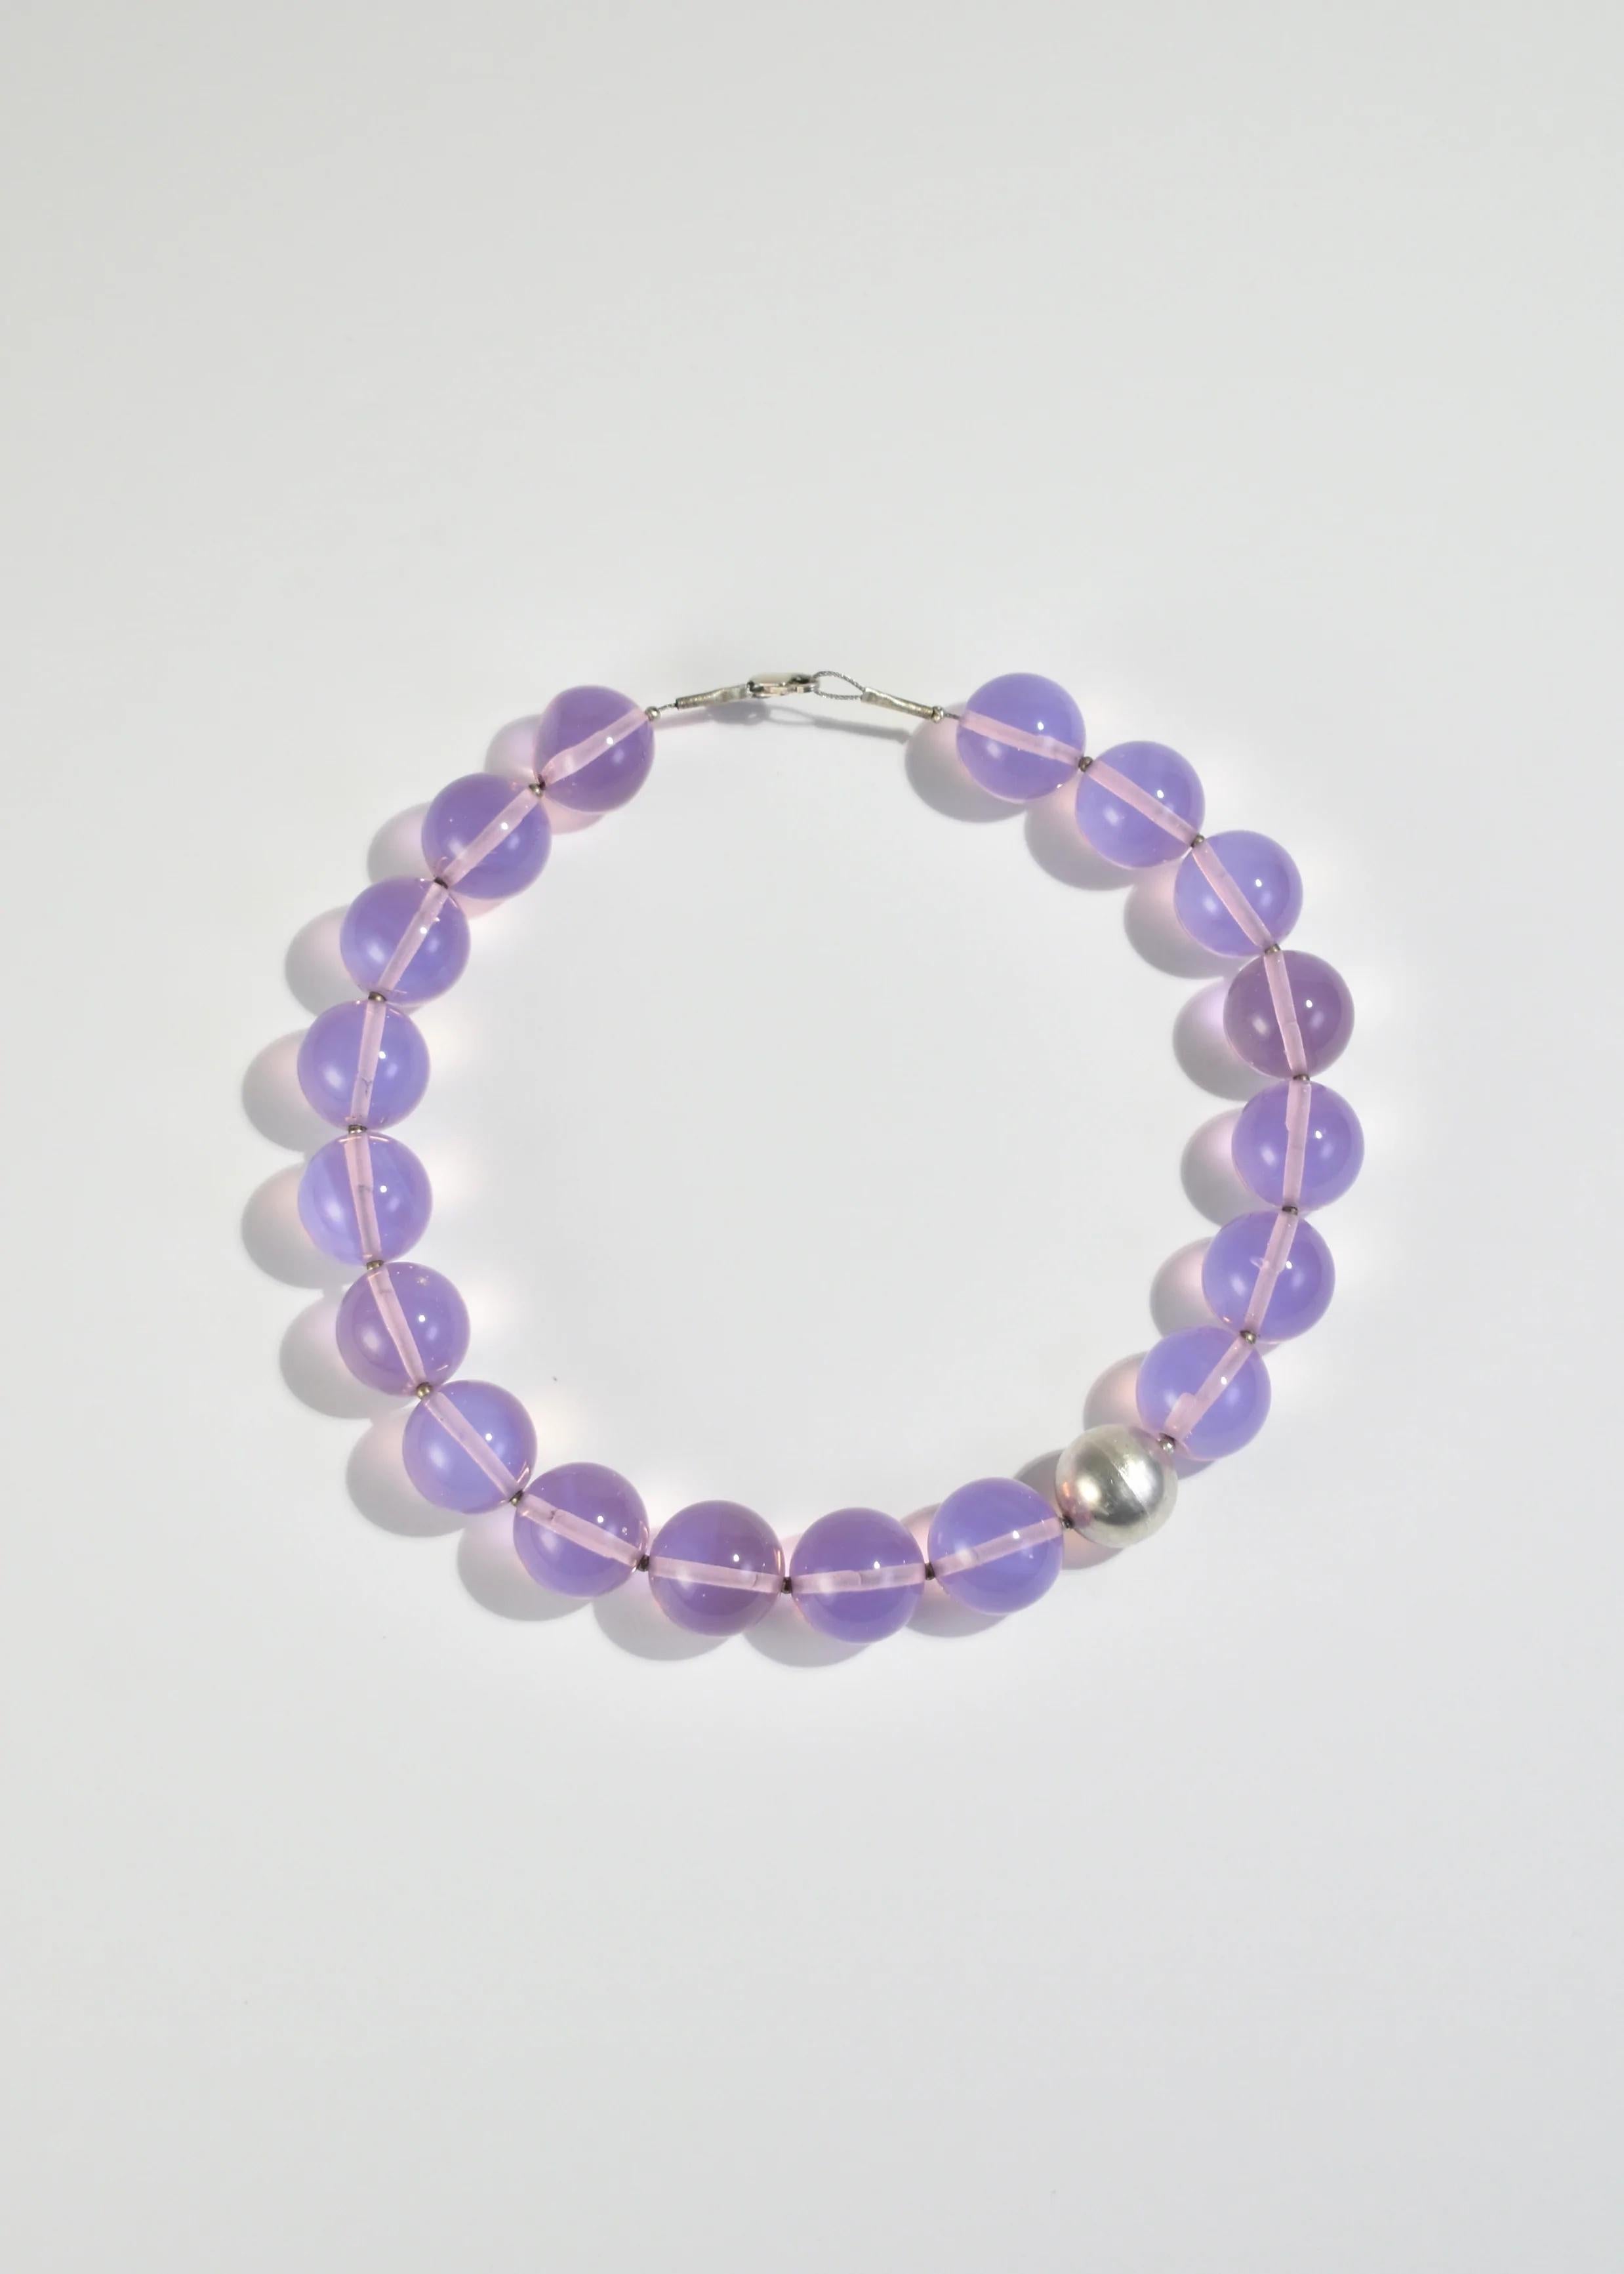 Stunning vintage necklace with lilac lucite beads and pewter bead detail, clasp closure.

Material: Pewter, lucite. 